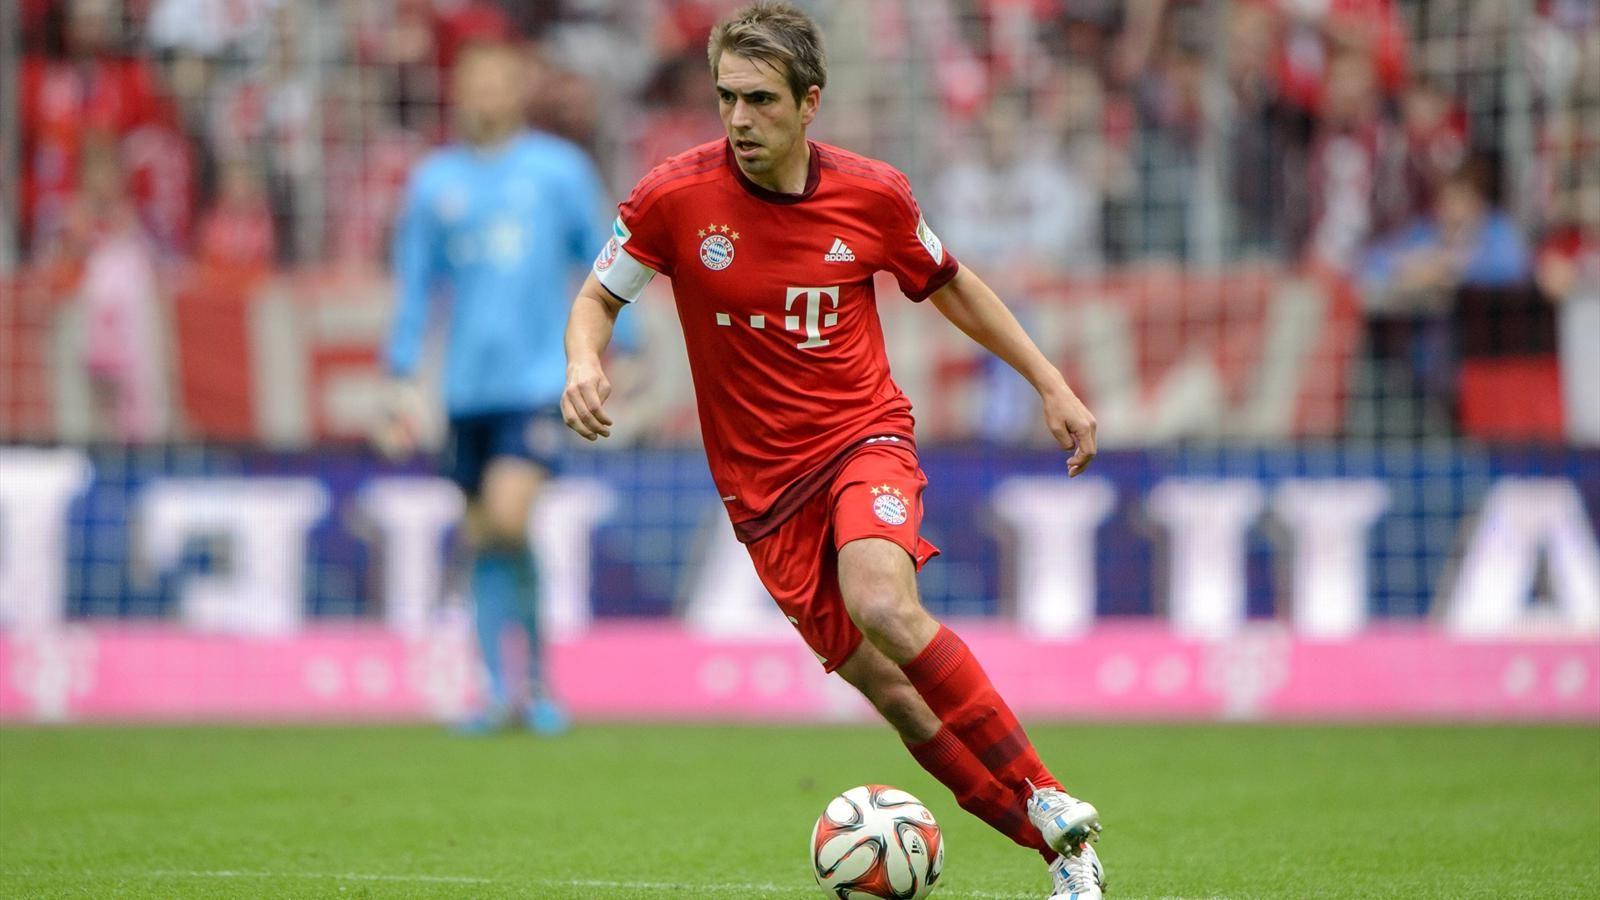 Picture of Philipp Lahm player on the pitch